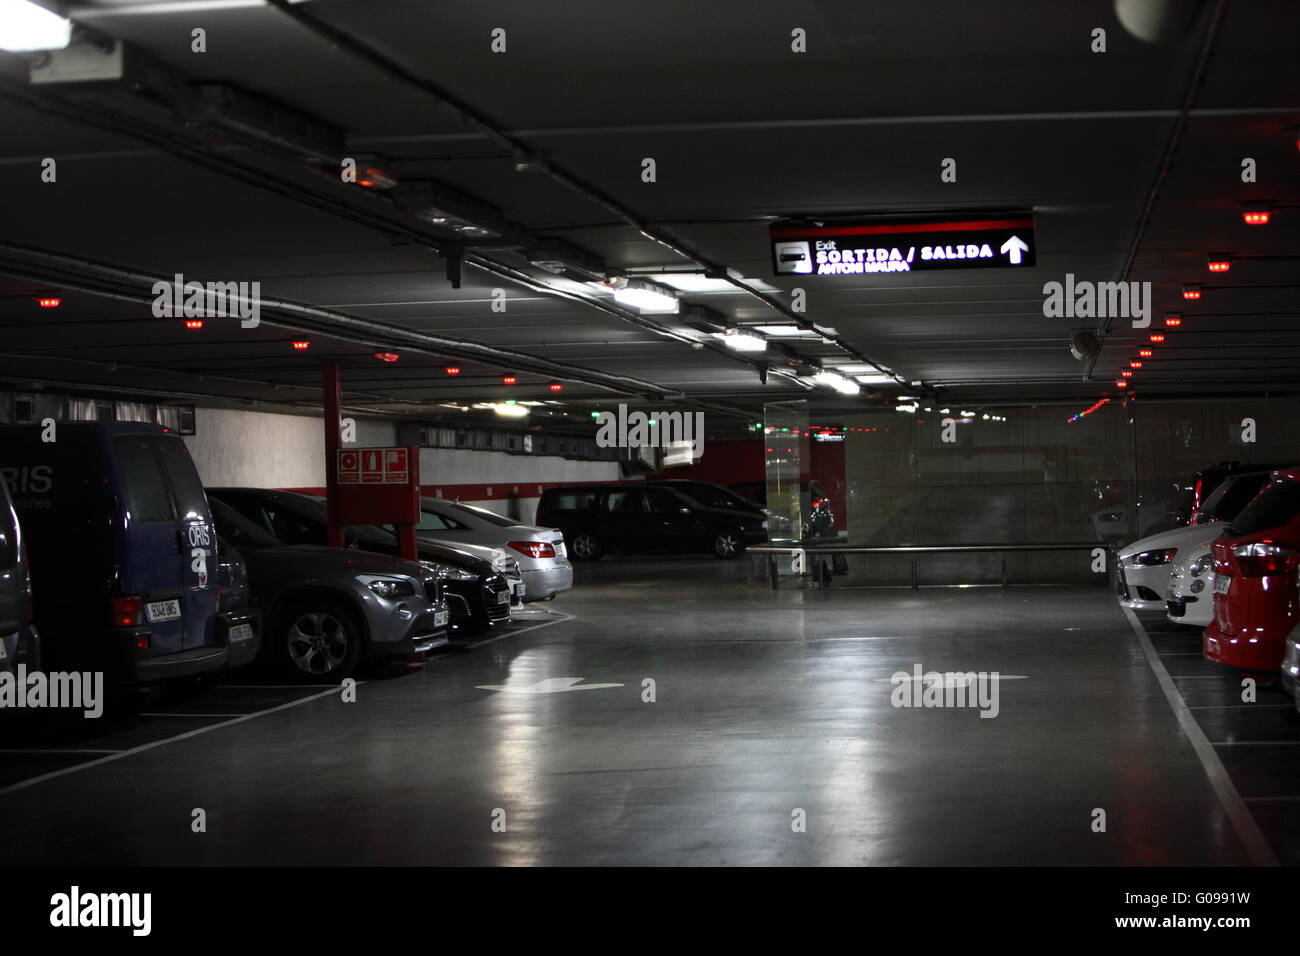 Interior of a covered vehicle parking lot Stock Photo